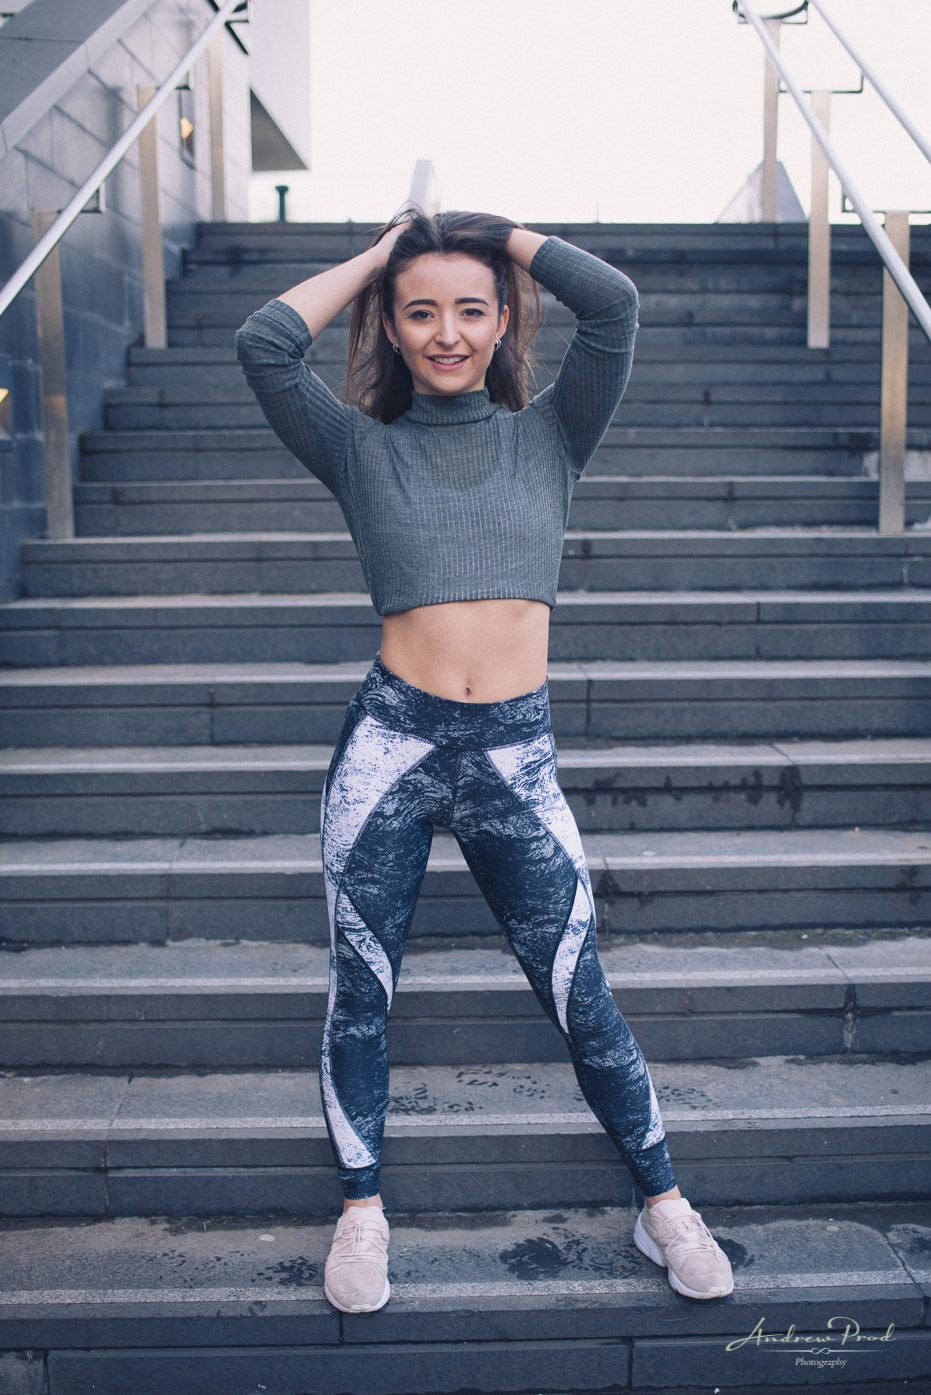 Urban Fitness Portraits In London - Lifestyle & Fitness Photography